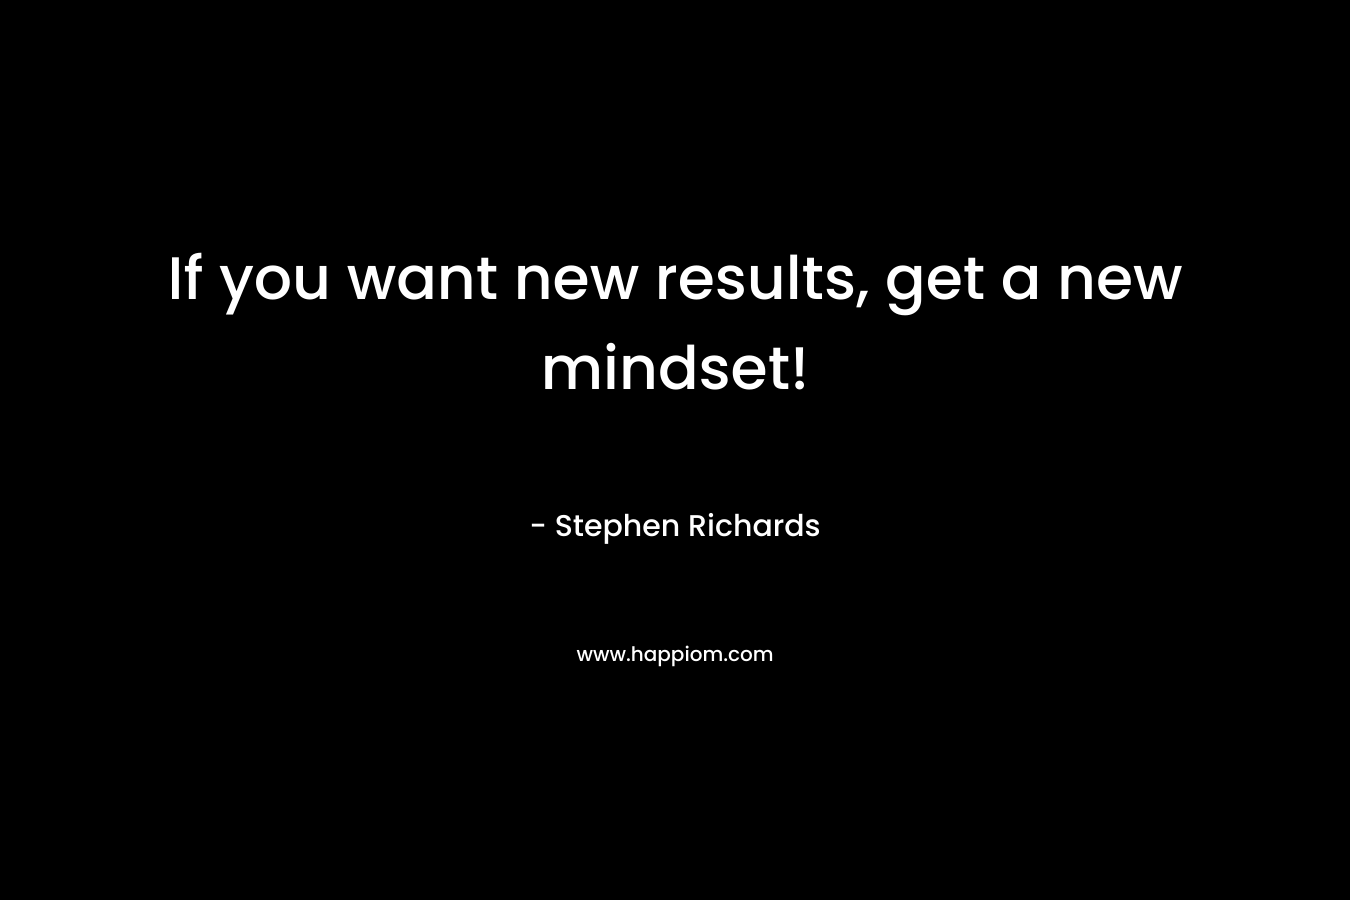 If you want new results, get a new mindset!